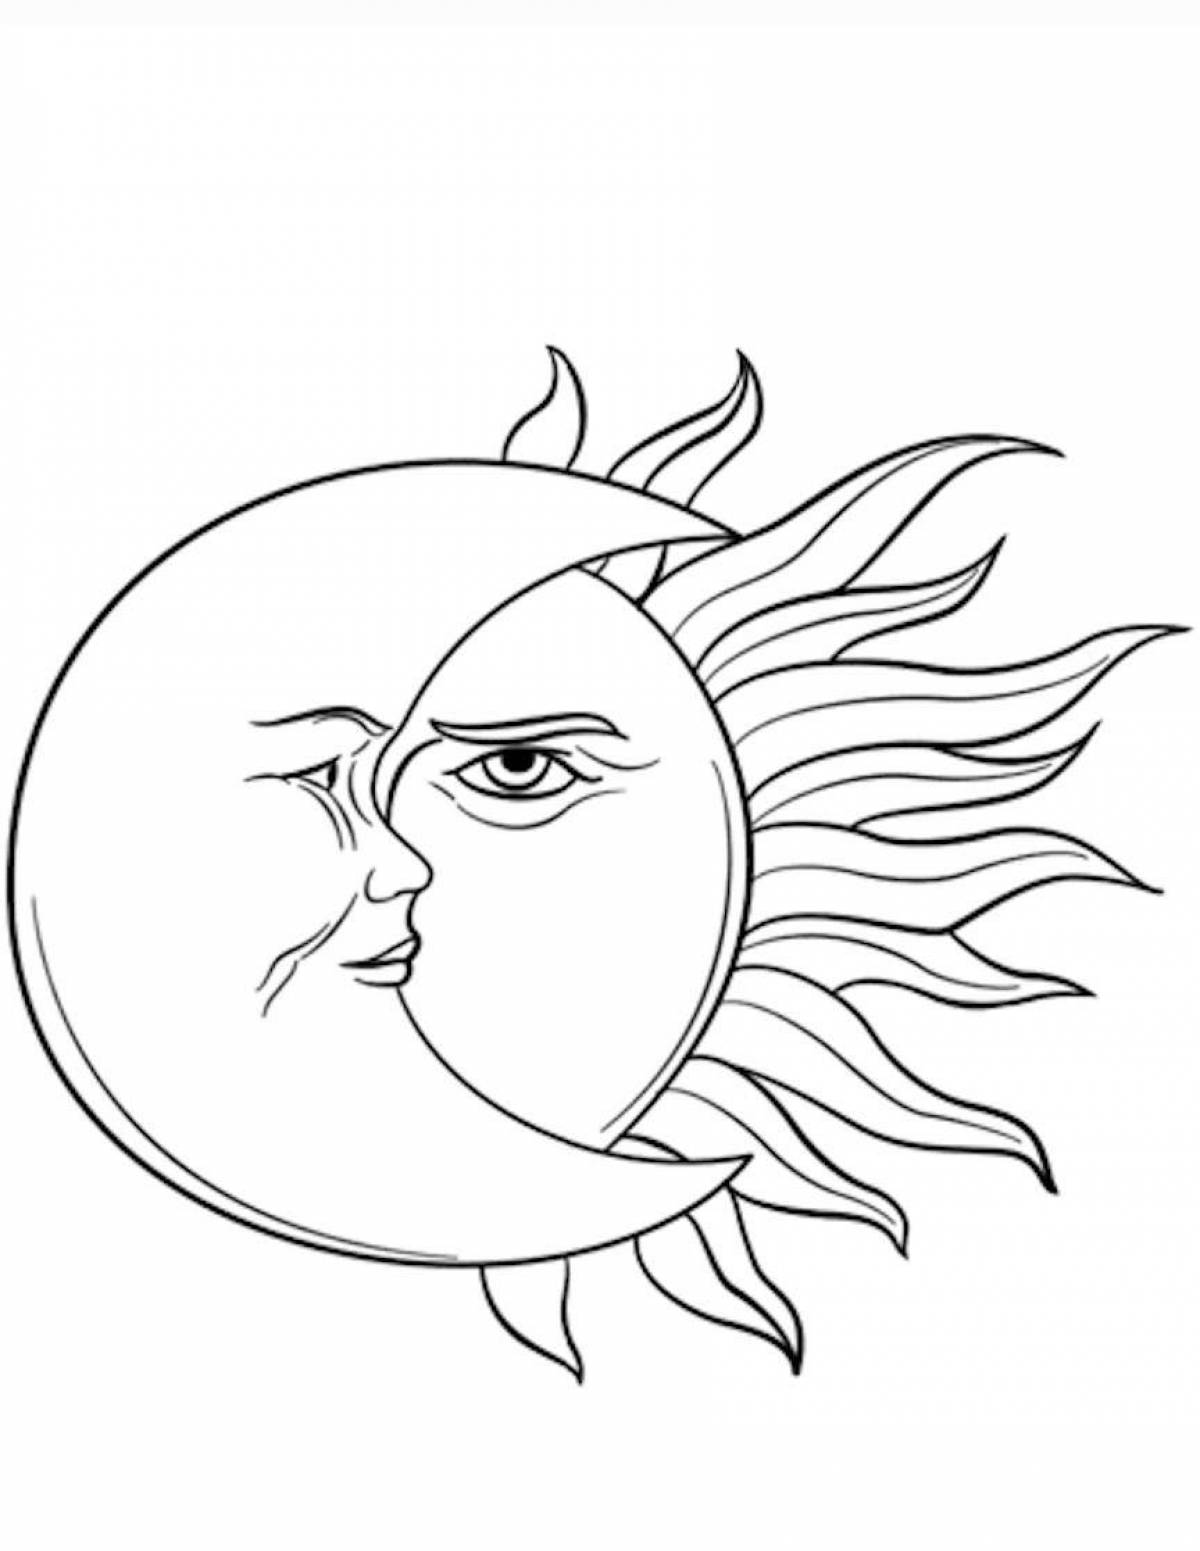 Amazing coloring book moon and sun for kids